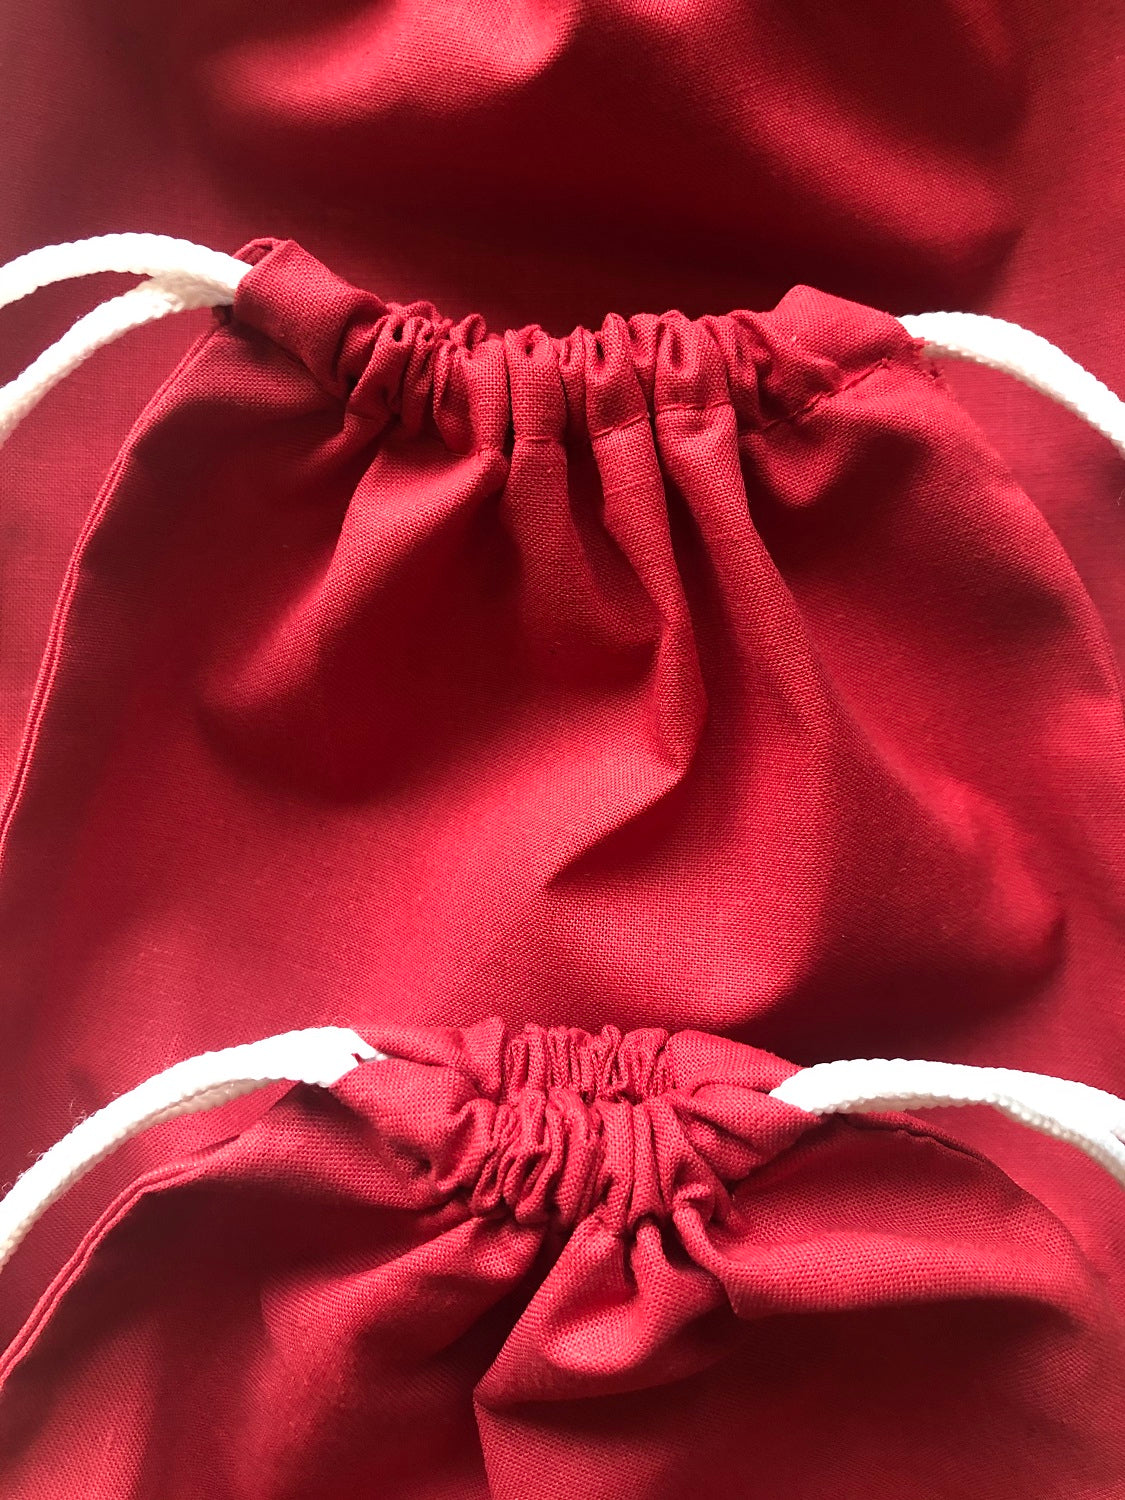 2x3 Inches Reusable Eco-Friendly Cotton Double Drawstring Bags Red Color